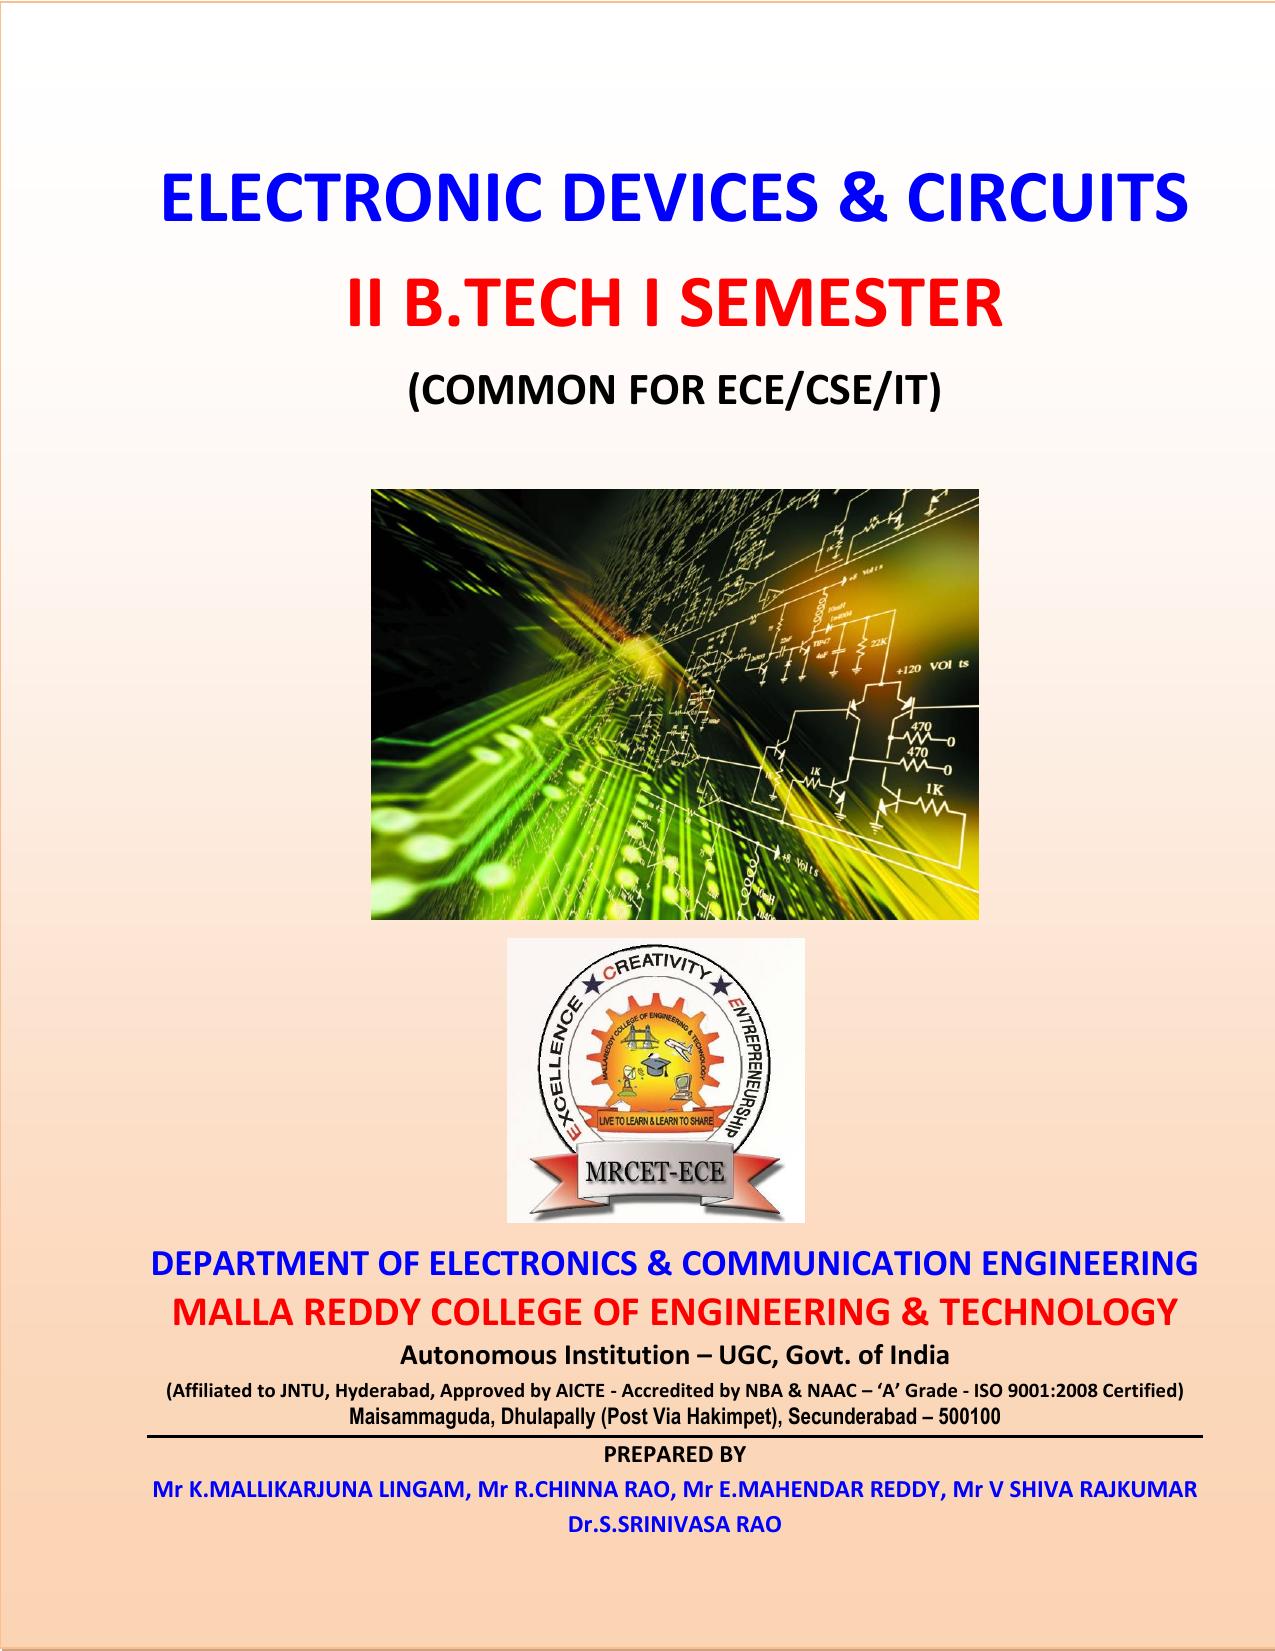 Electronic Devices and Circuits Academic Programme ( PDFDrive.com ) (1)